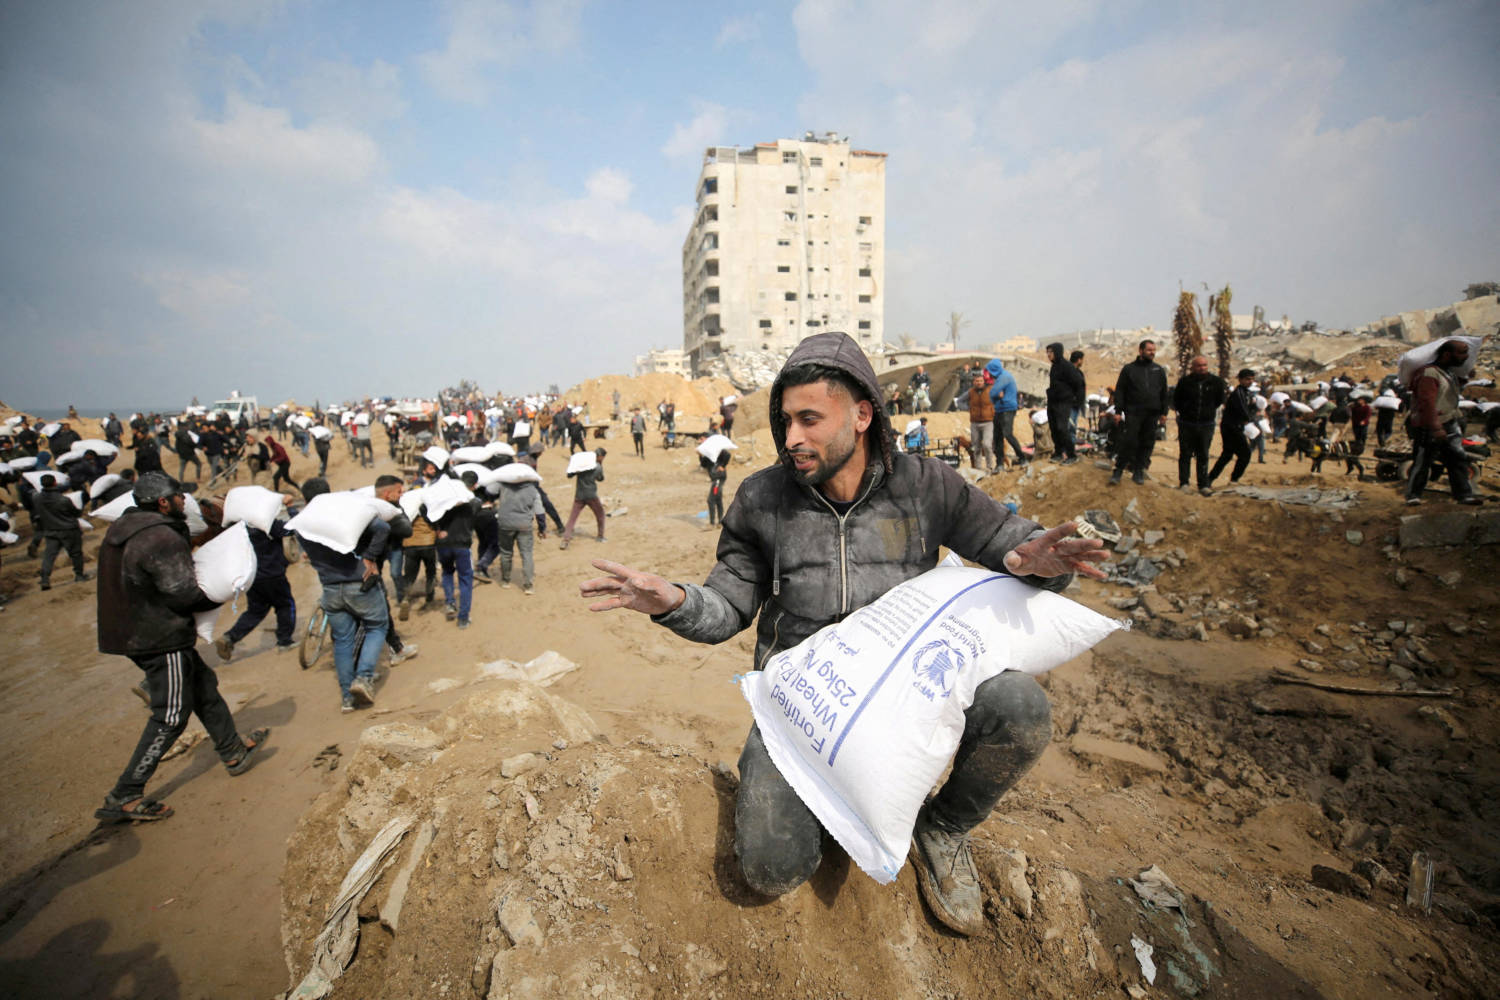 File Photo: Palestinians Carry Bags Of Flour They Grabbed From An Aid Truck Near An Israeli Checkpoint In Gaza City